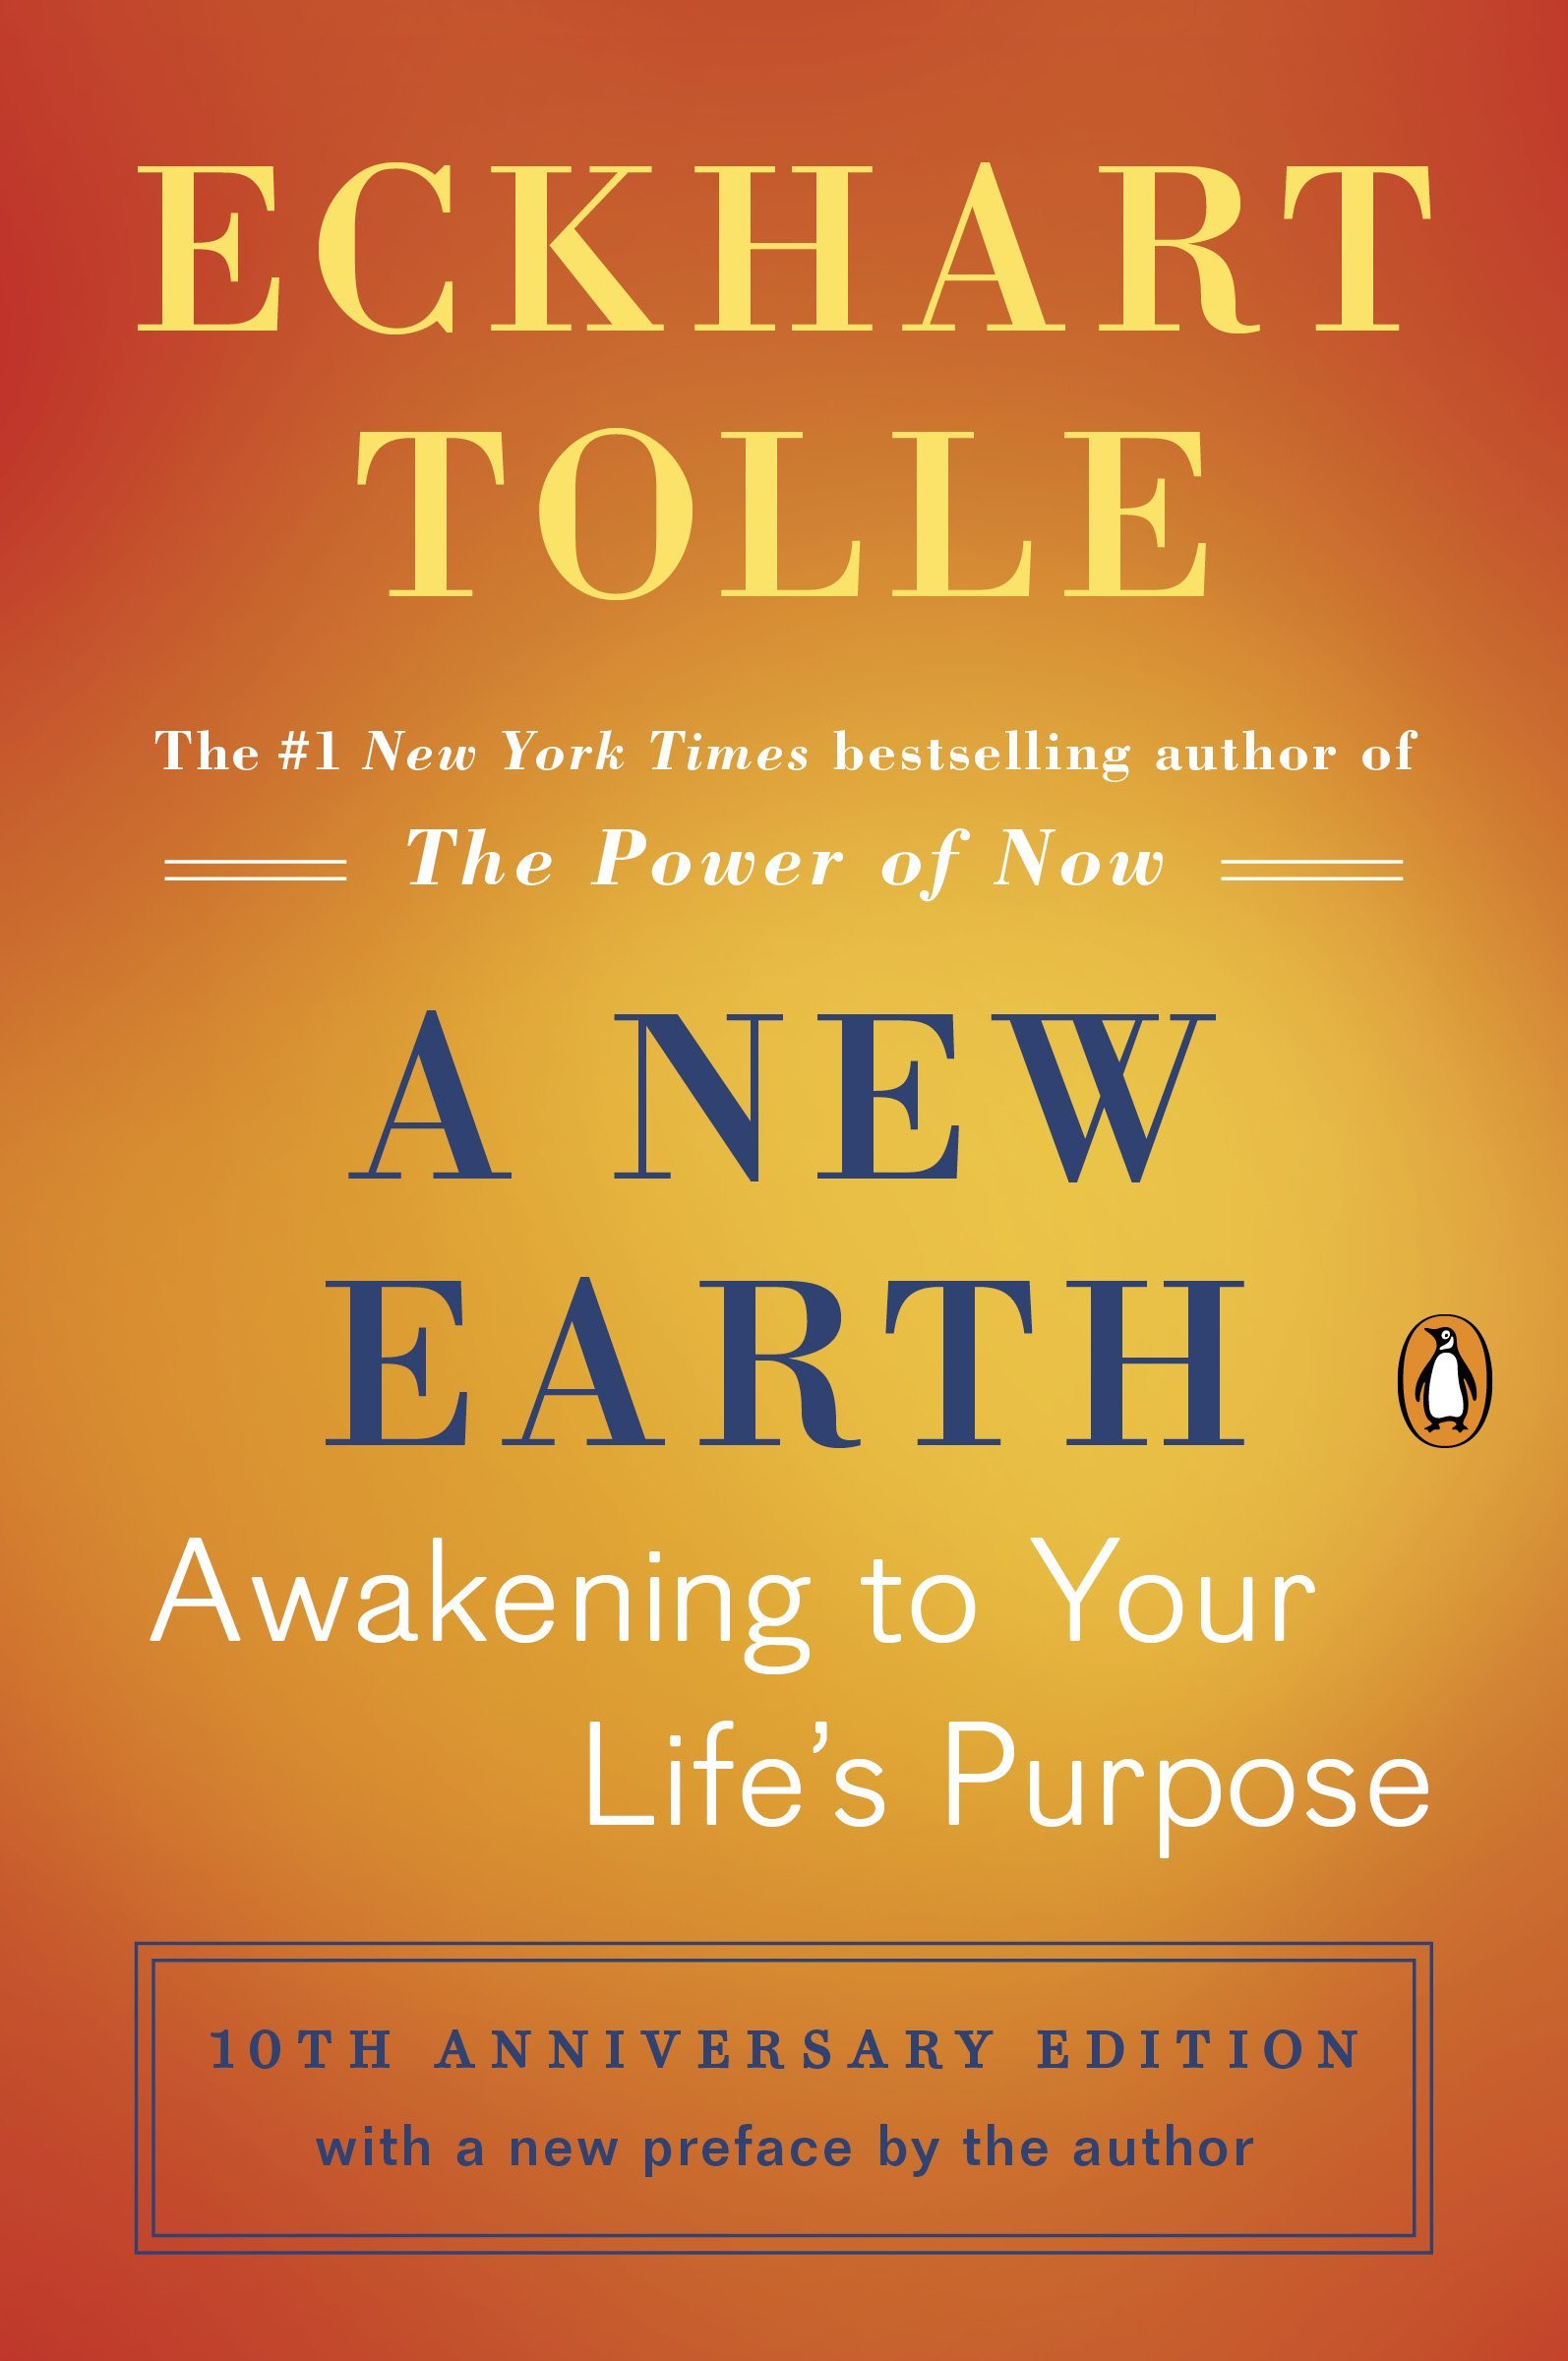 A new earth eckhart tolle pdf download